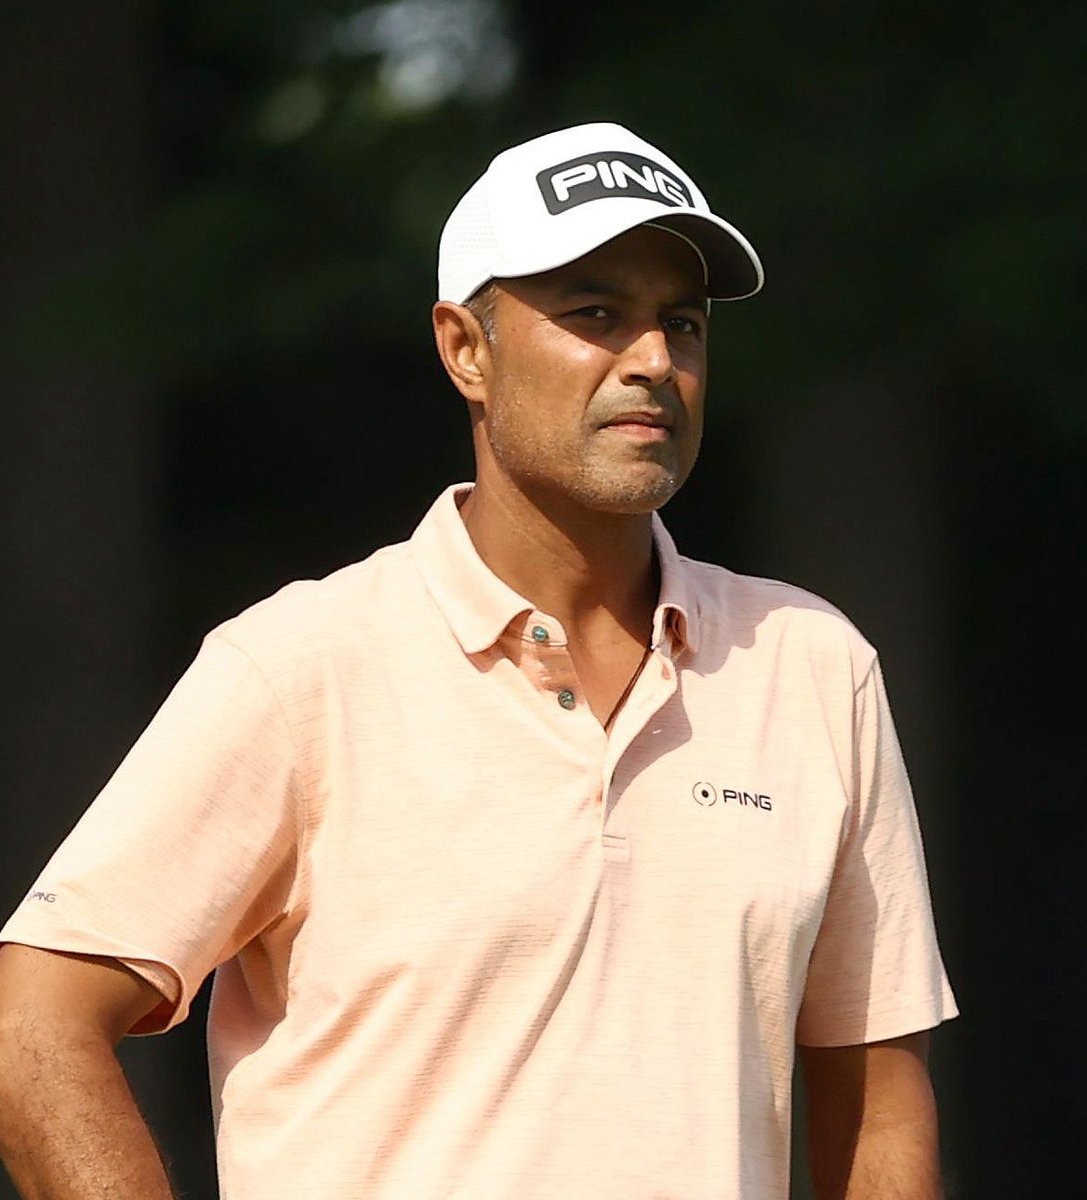 Arjun Atwal in shared lead at Pure Insurance on Champions Tour in US

dktsports.com/latest-news.as…

#DKTSports 
#ArjunAtwal #ChampionsTour #PGATourChampions #PGATour #WyndhamChampionship #PGATourgolf #PGAofAmerica #PureInsurance #Golf